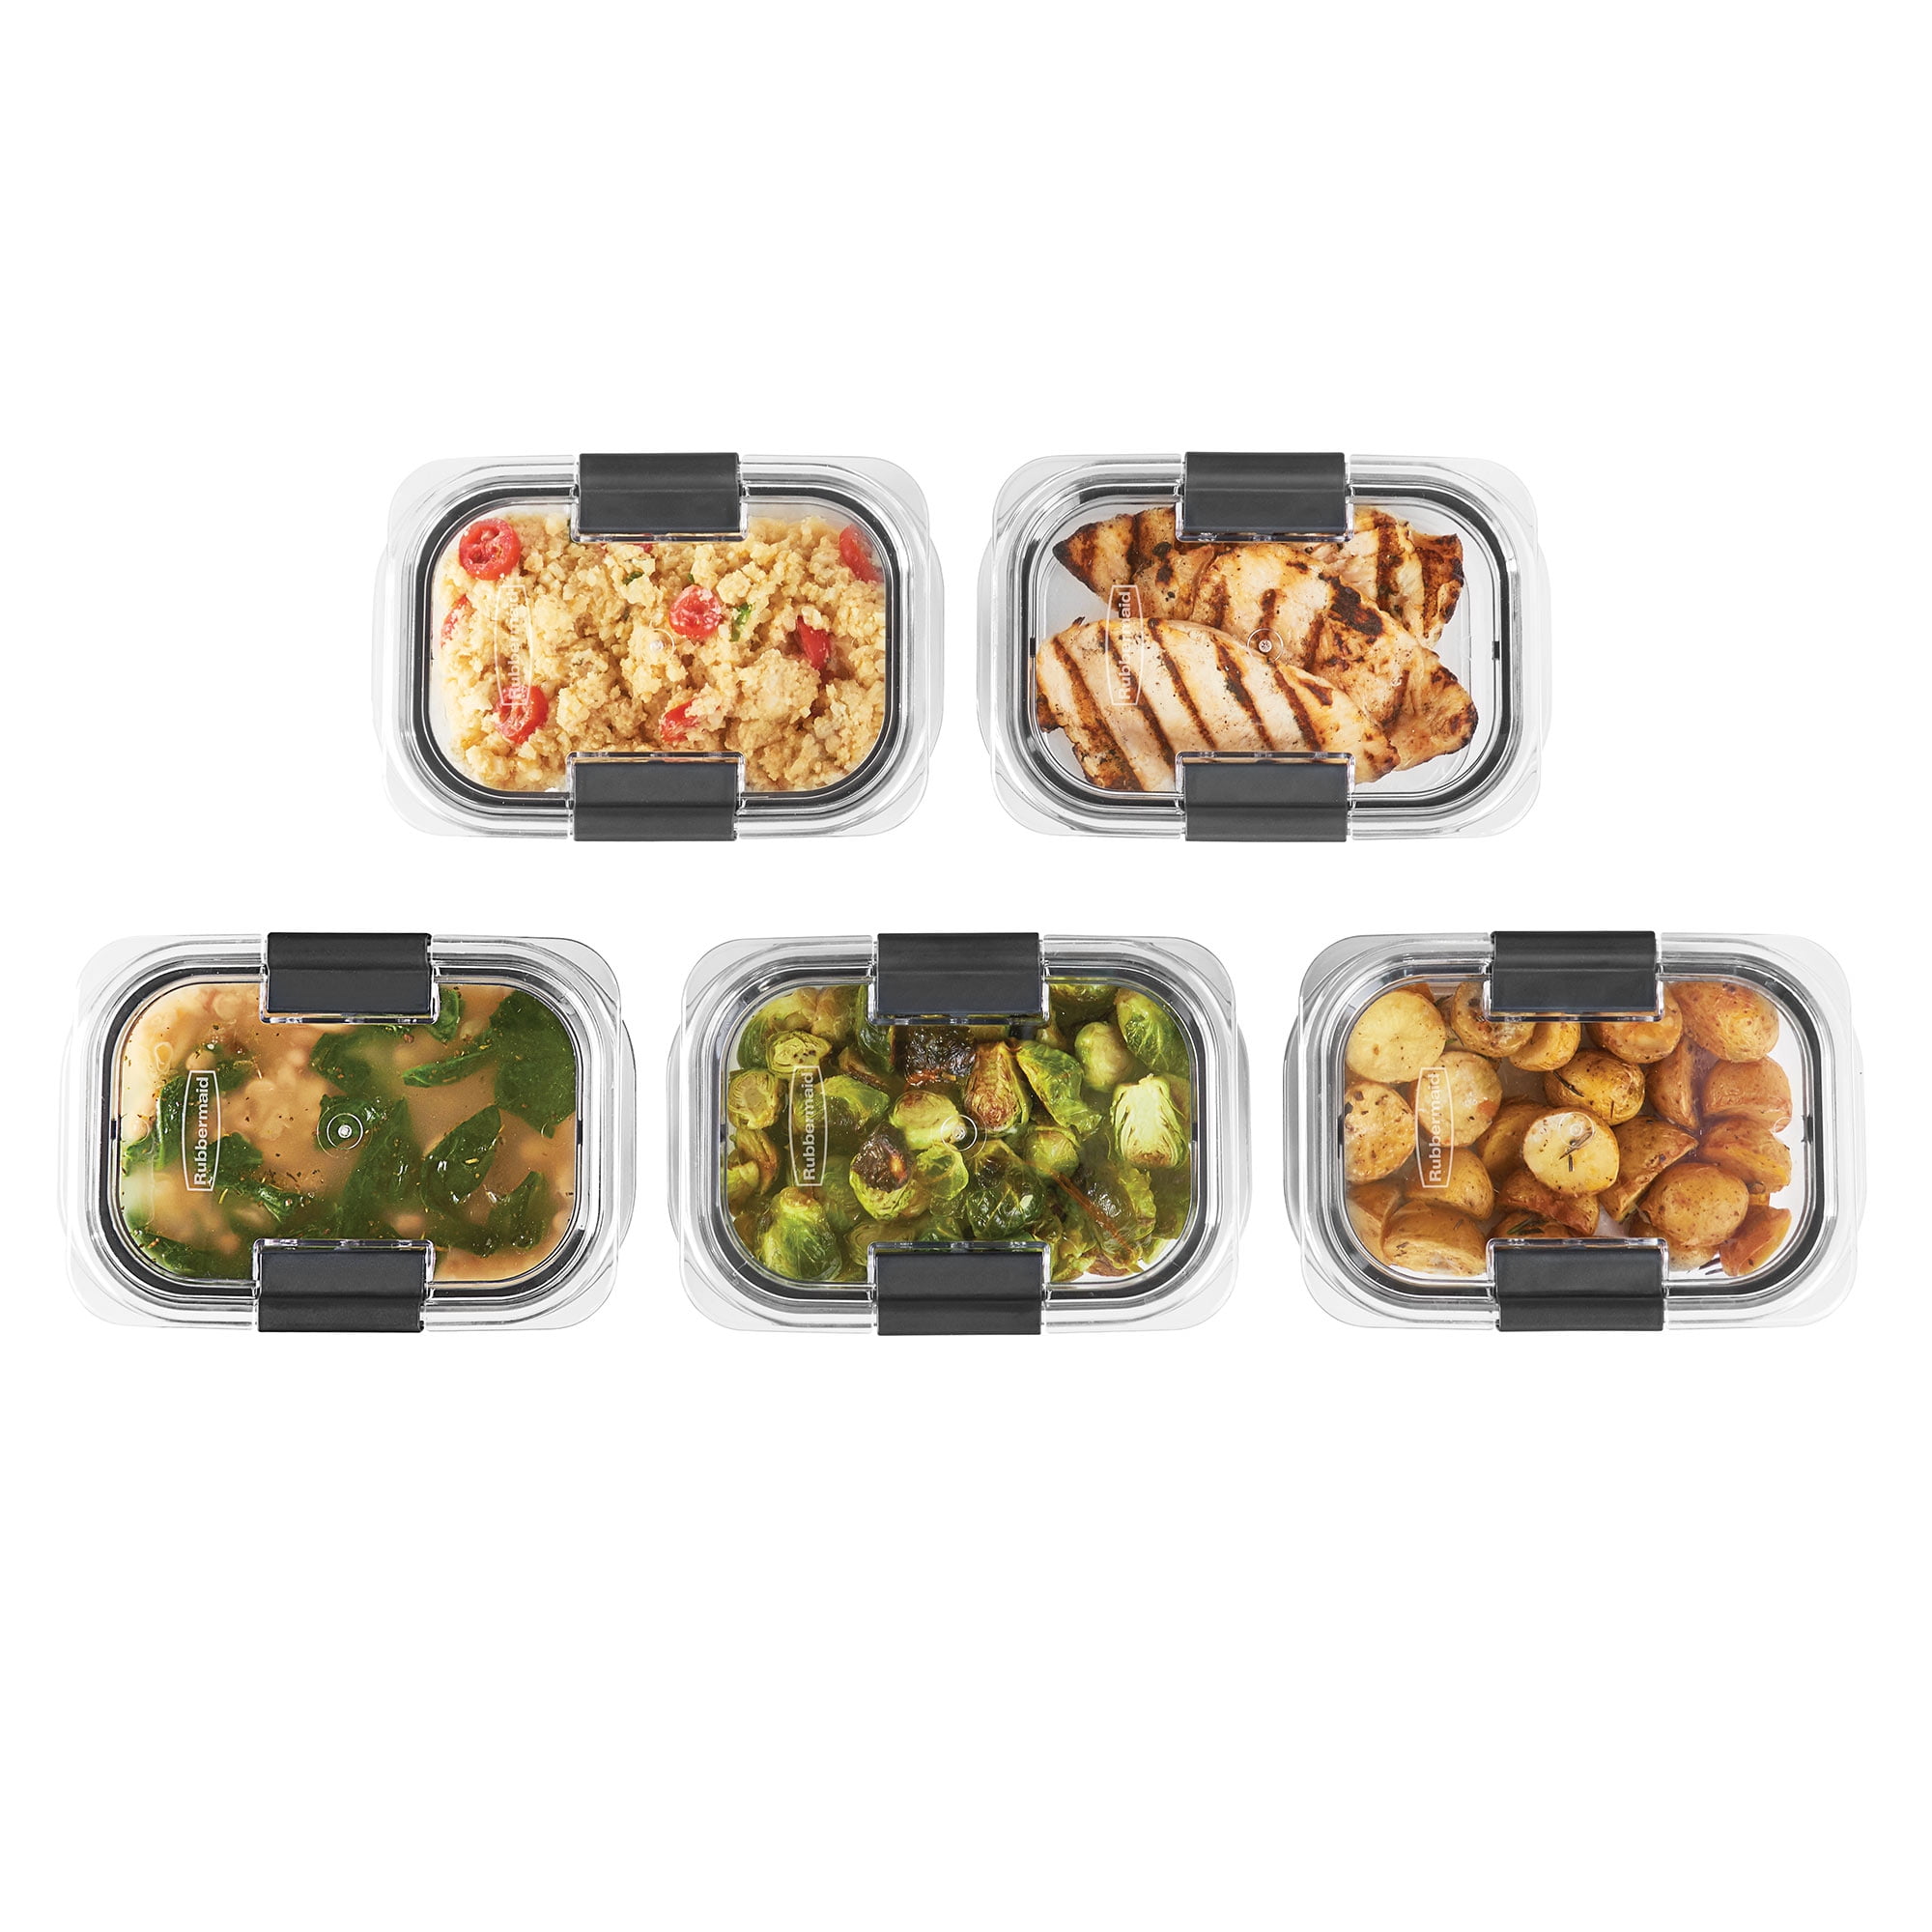 Rubbermaid 10-Piece Brilliance Food Storage Containers with Lids for Lunch, Meal  Prep, and Leftovers, Dishwasher Safe, 3.2-Cup, Clear/Grey –